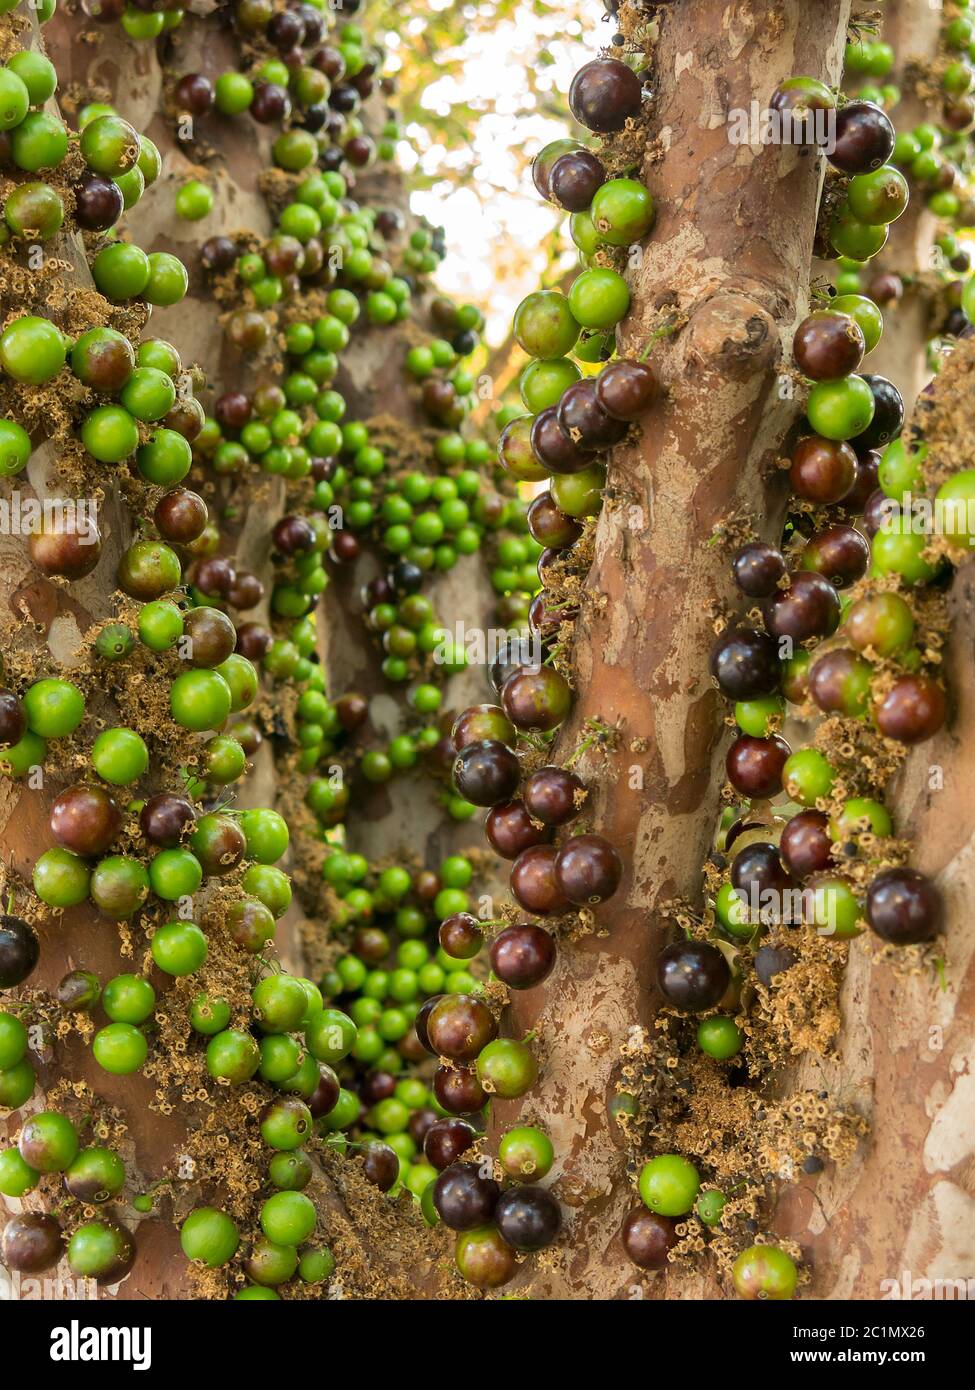 Jaboticaba brazilian tree with a lot of green fruits on trunk Stock Photo